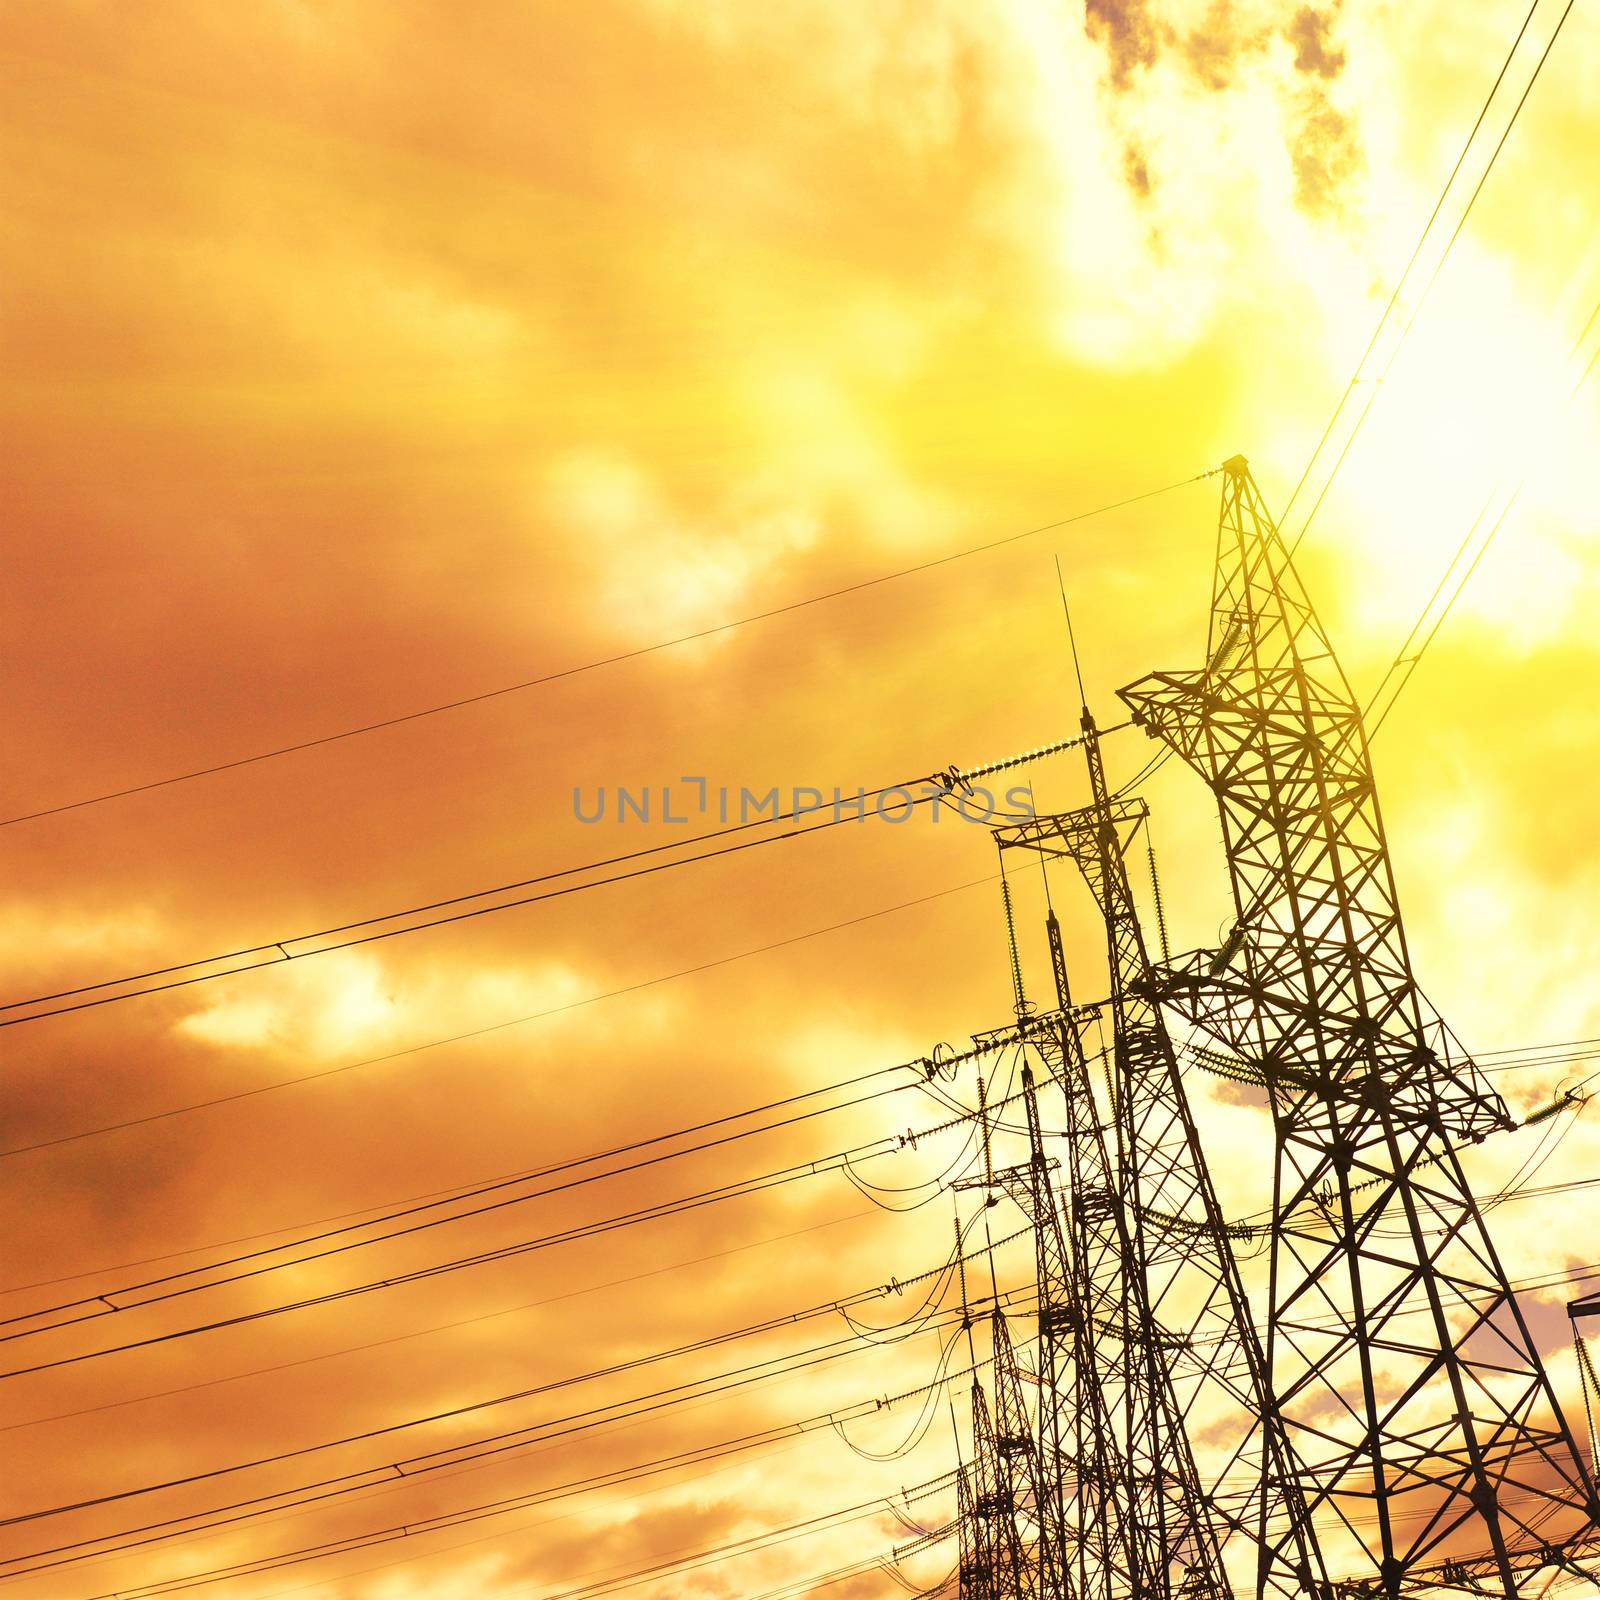 Silhouette Sunset Scene Of High Voltage Electrical Pole Structur